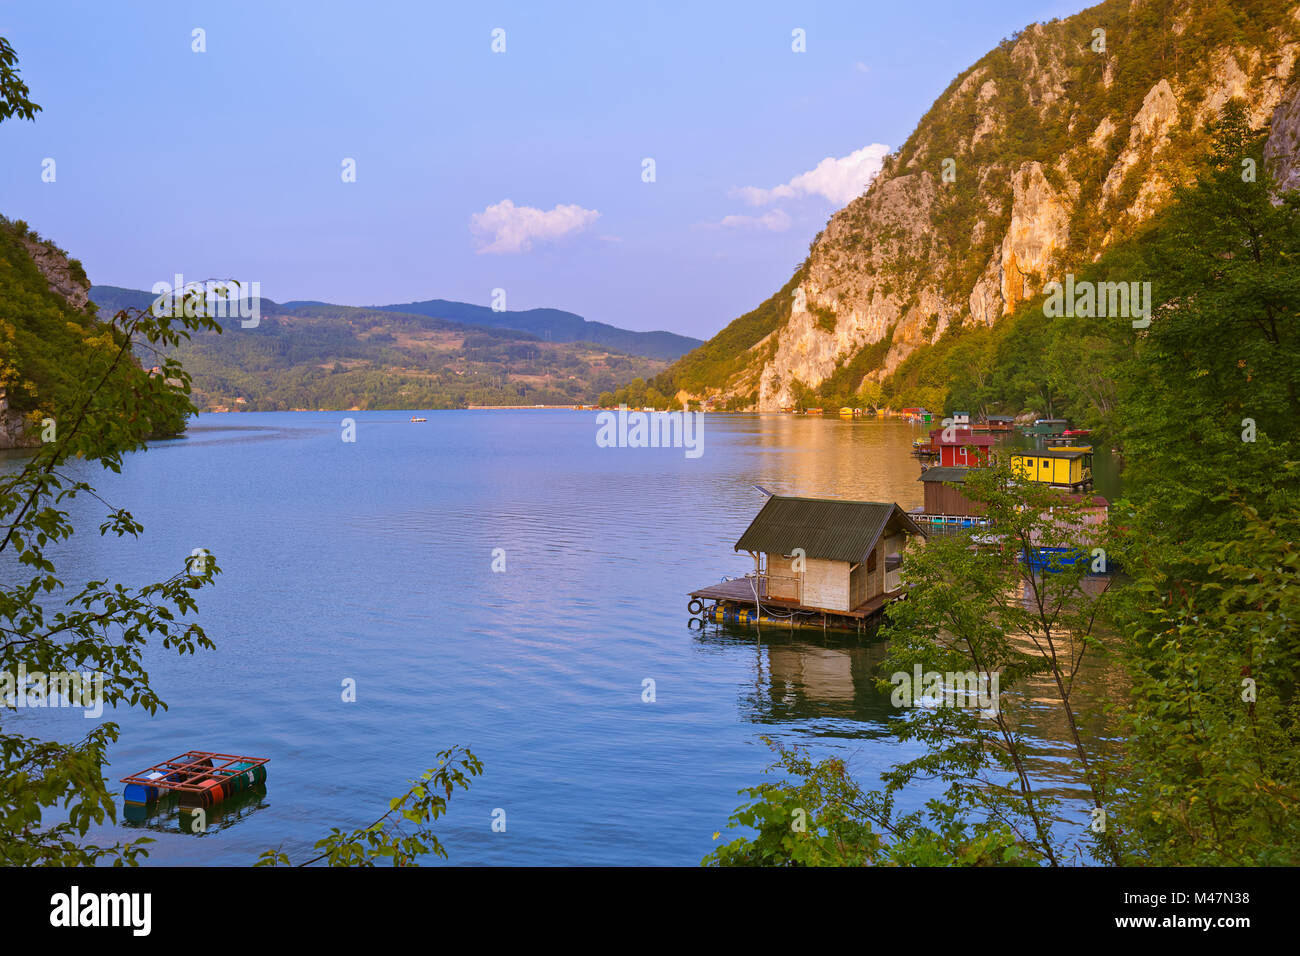 River Drina - national nature park in Serbia Stock Photo